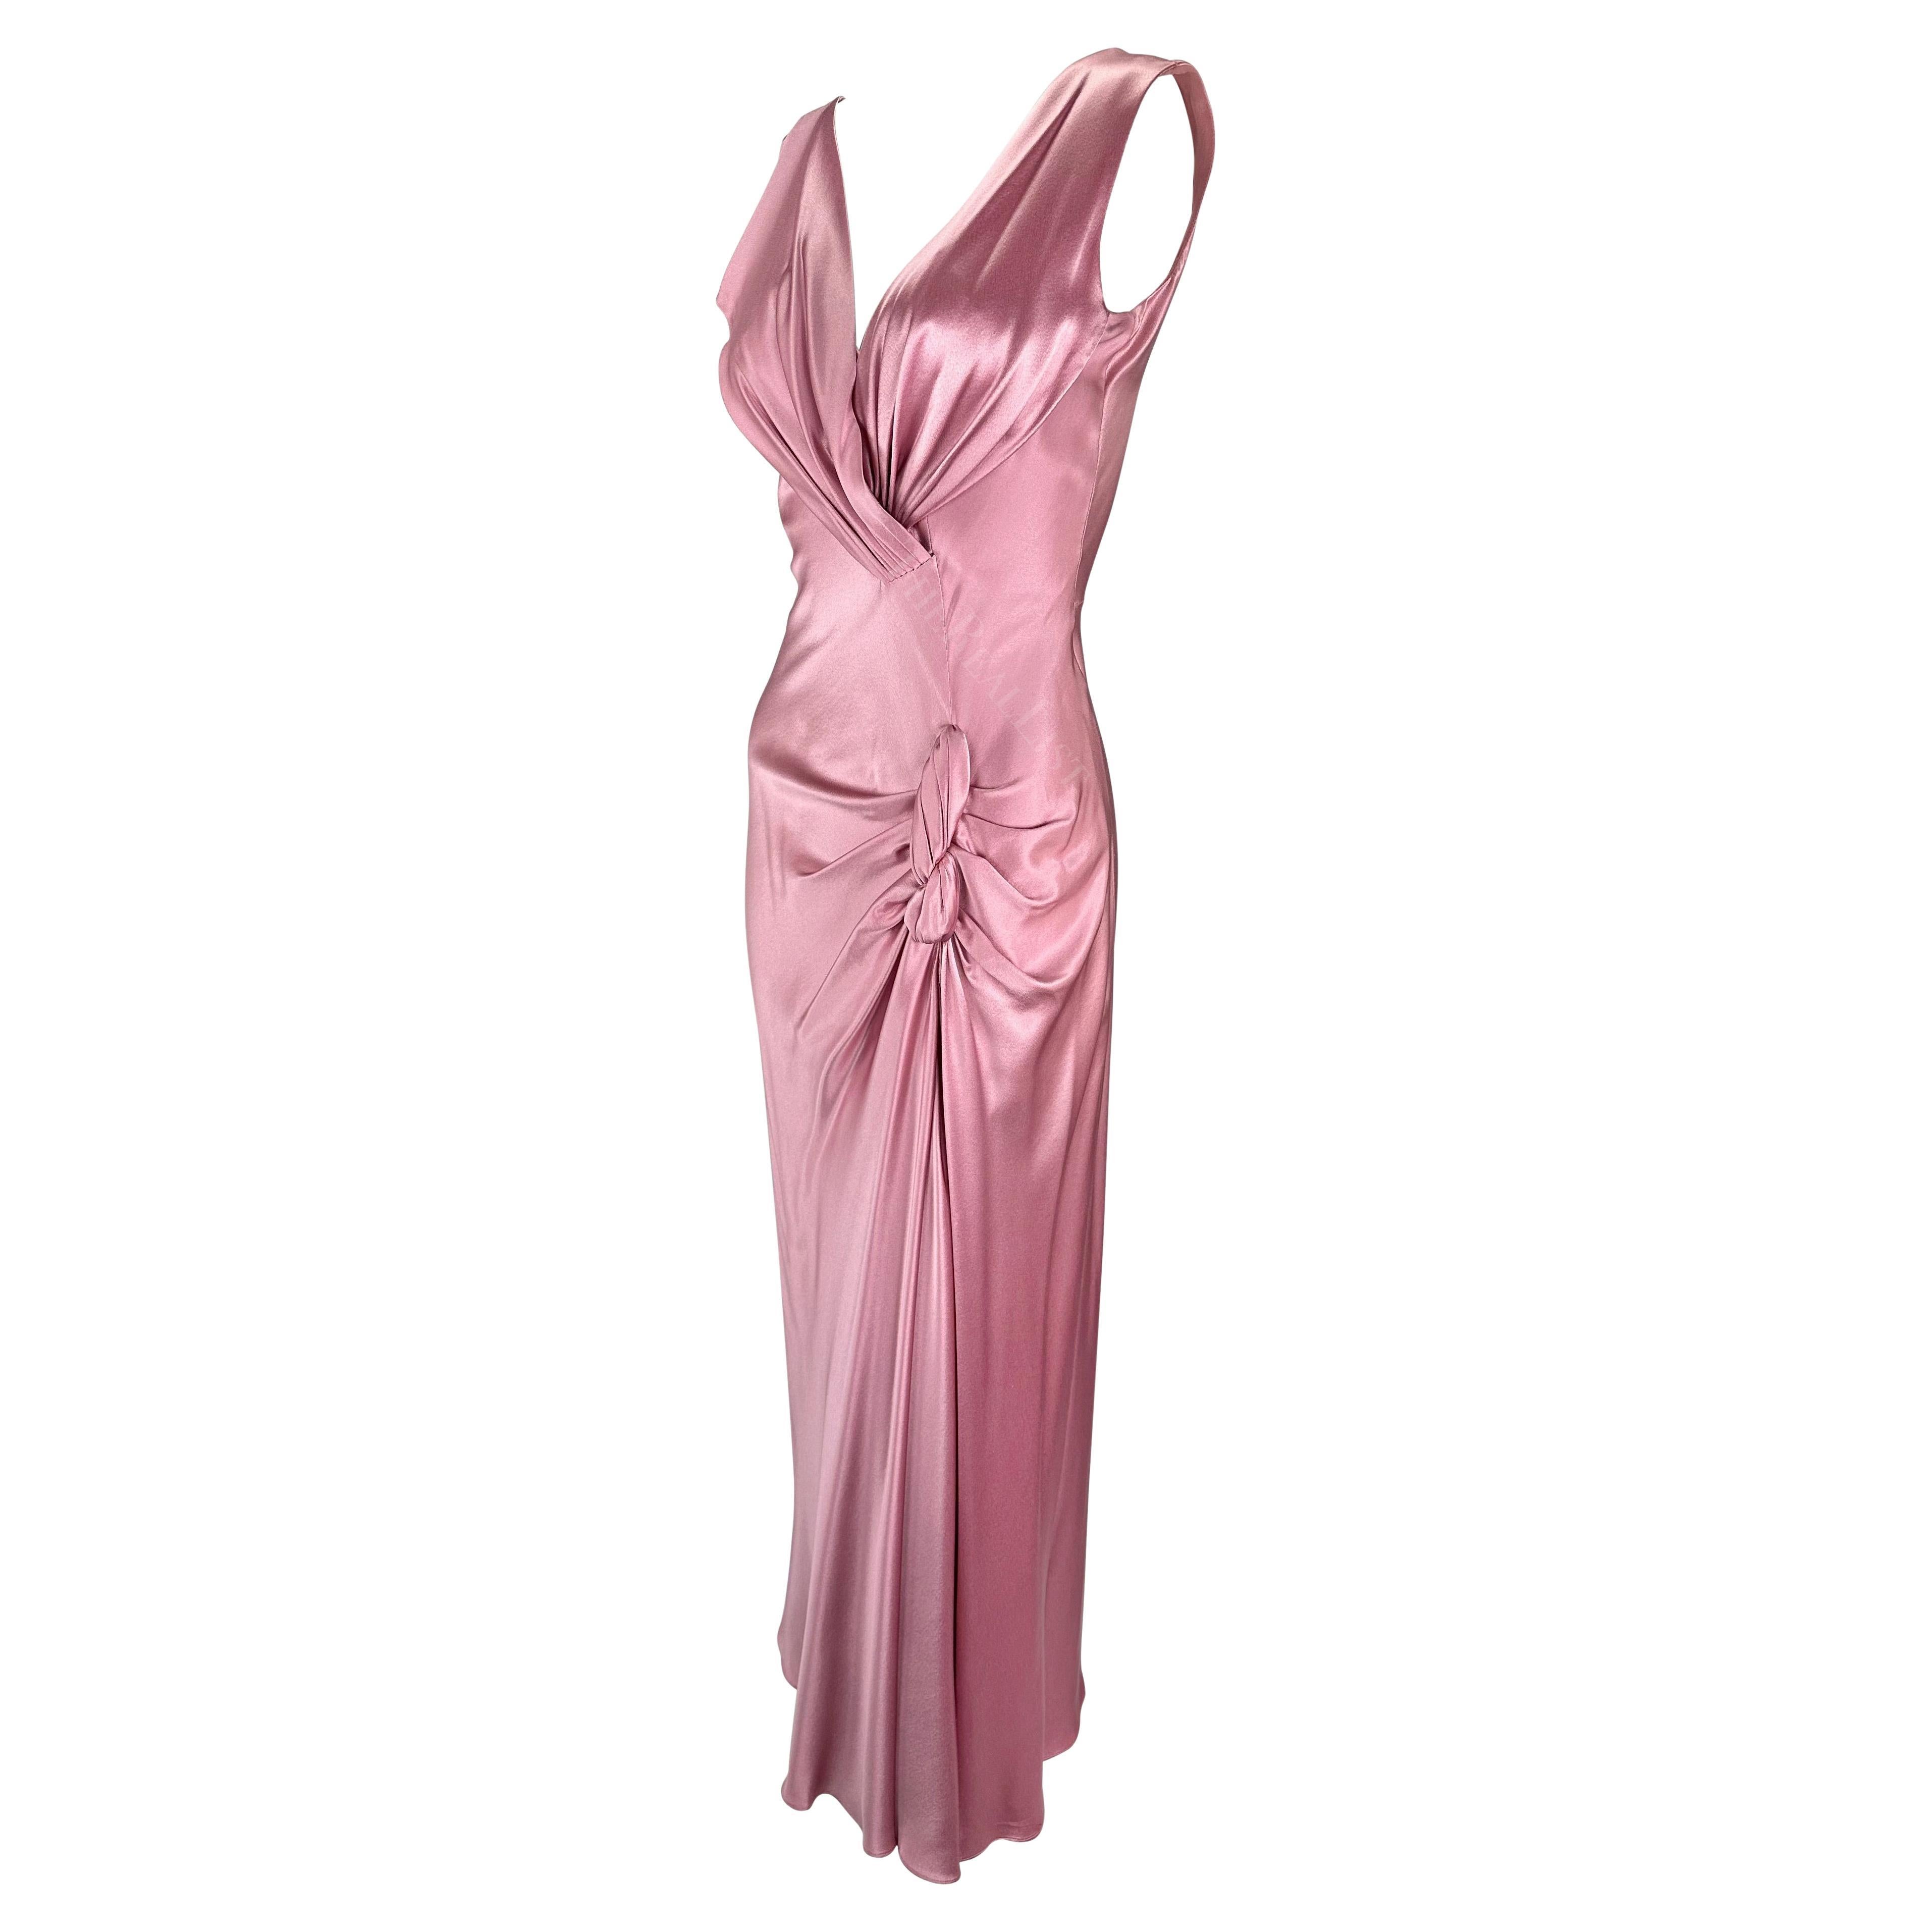 Women's F/W 2003 Christian Dior by John Galliano Rose Pink Silk Satin High Slit Gown For Sale